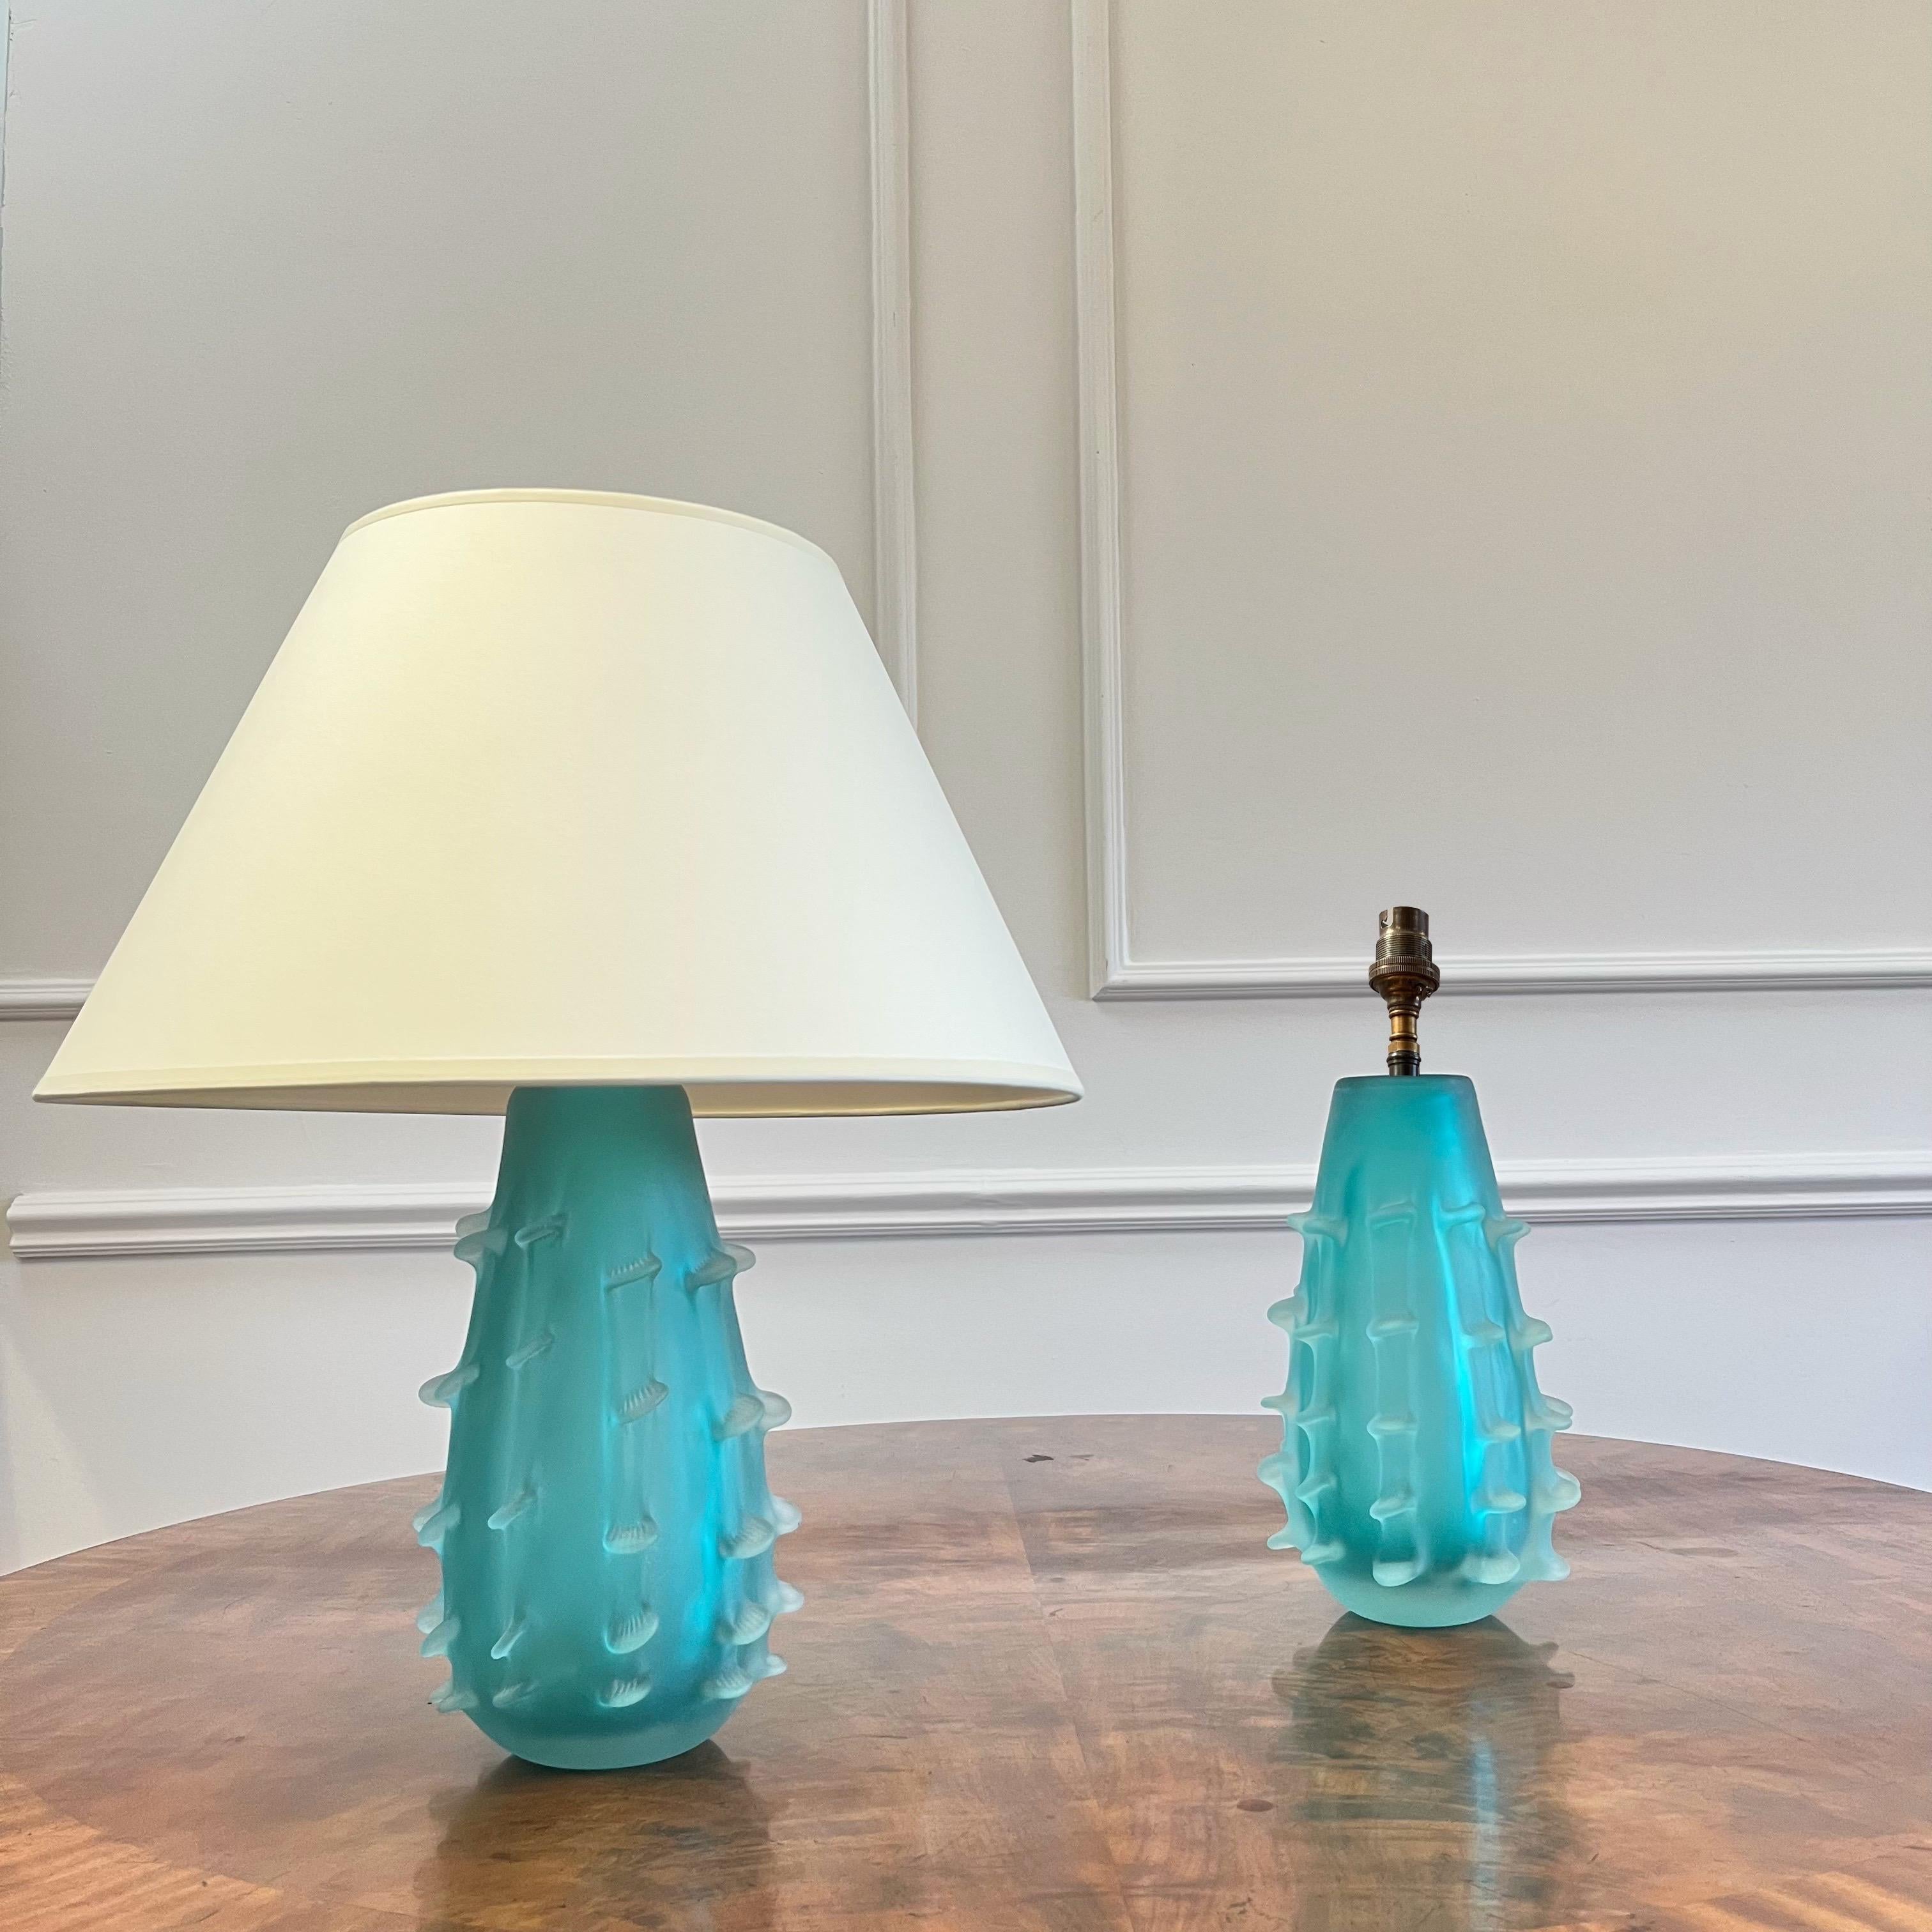 An exuberant pair of murano vases, evoking cactus forms in an an electrifying acid blue glass, now lamped. 

Italian, Mid Twentieth Century 